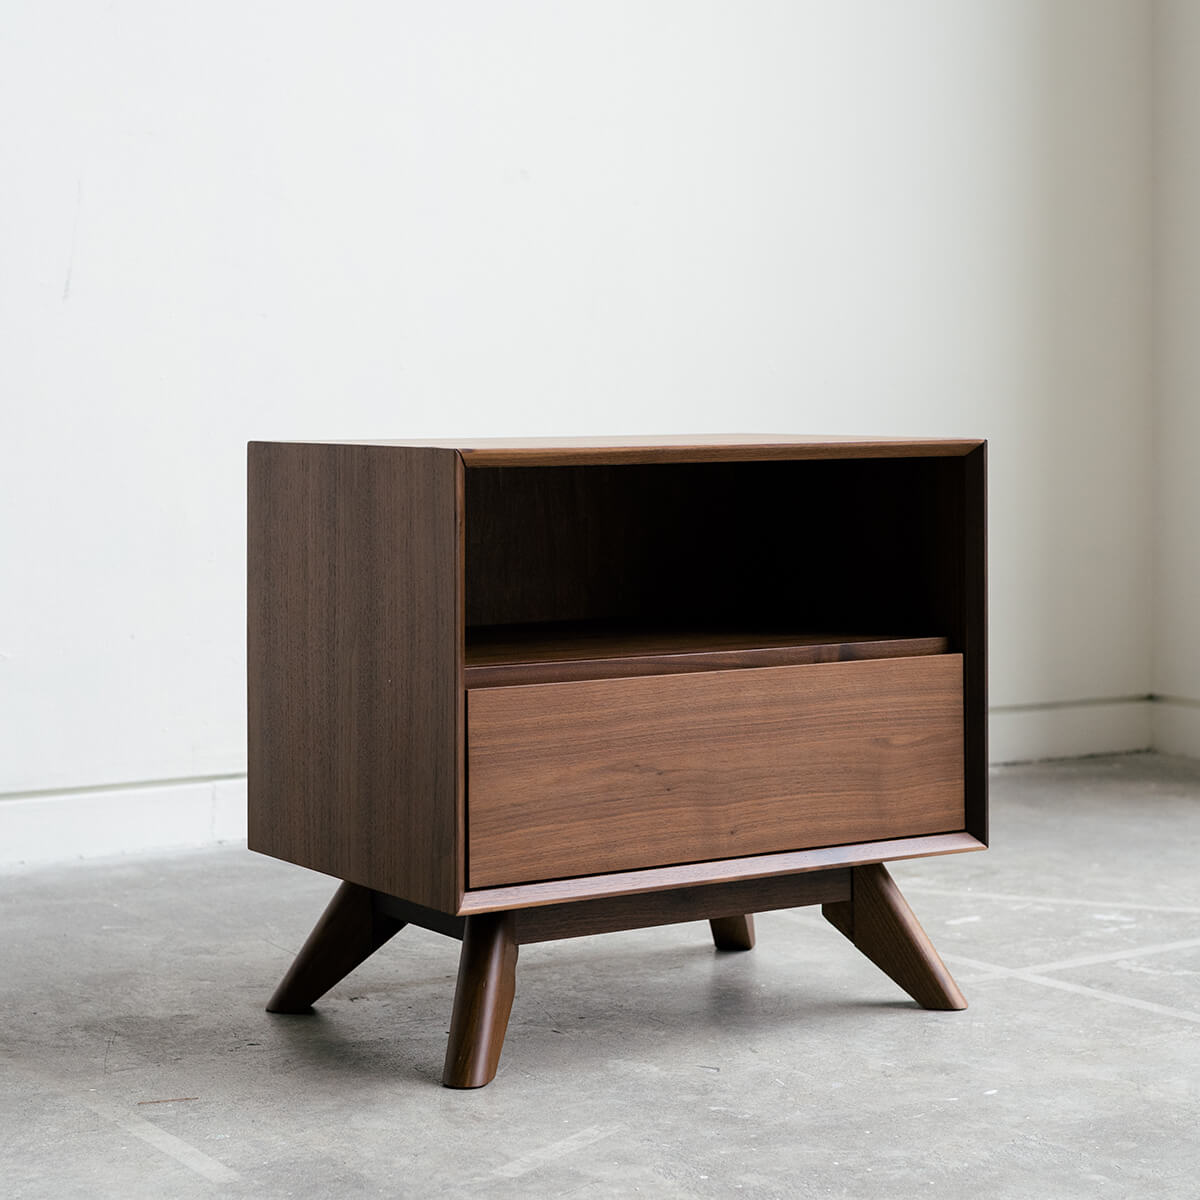 Mim Concept  best Modern furniture stores in Toronto, Ottawa and Mississauga to sell modern contemporary bedroom furniture and condo furniture. Minimal mid century modern furniture low profile bed nightstand minimalist solid walnut wood modern organic Scandanivian